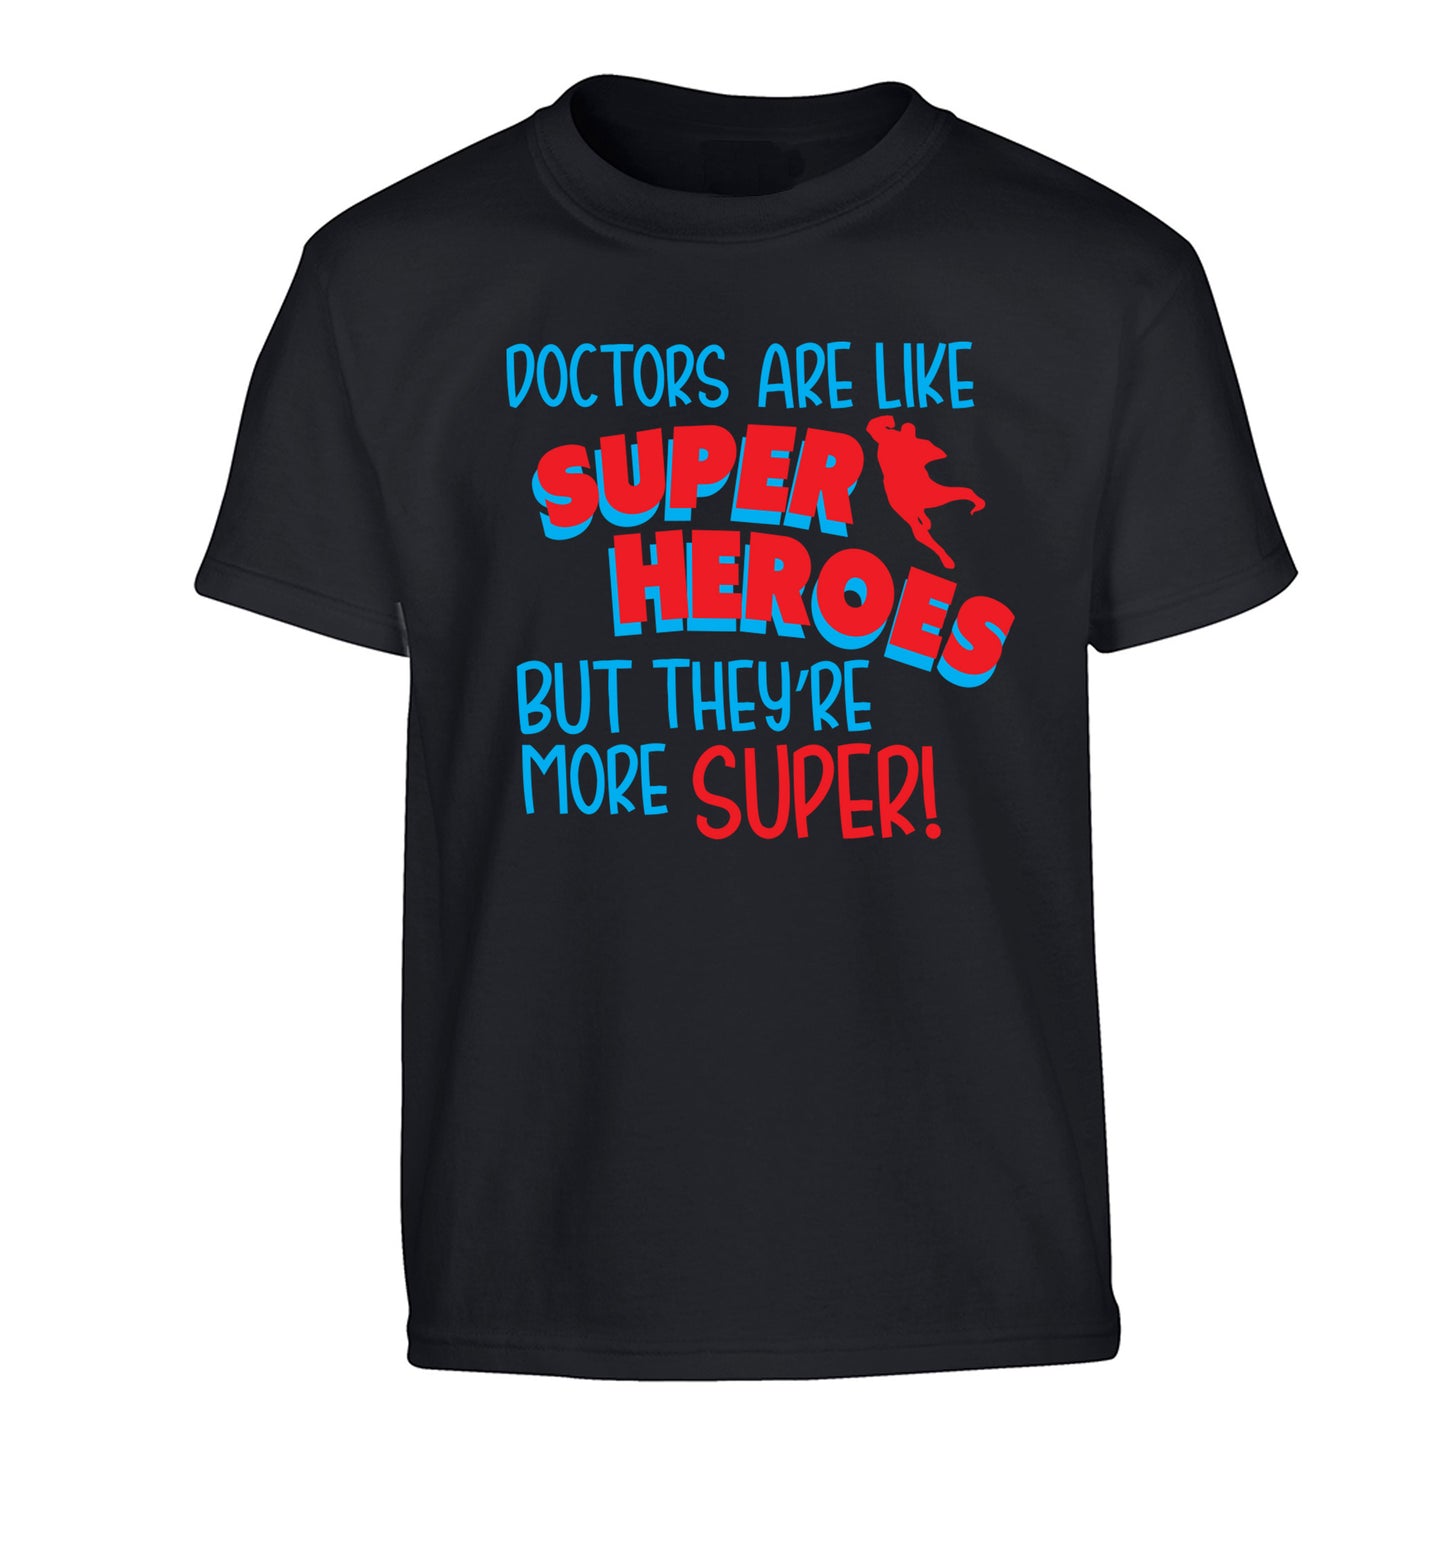 Doctors are like superheros but they're more super Children's black Tshirt 12-13 Years